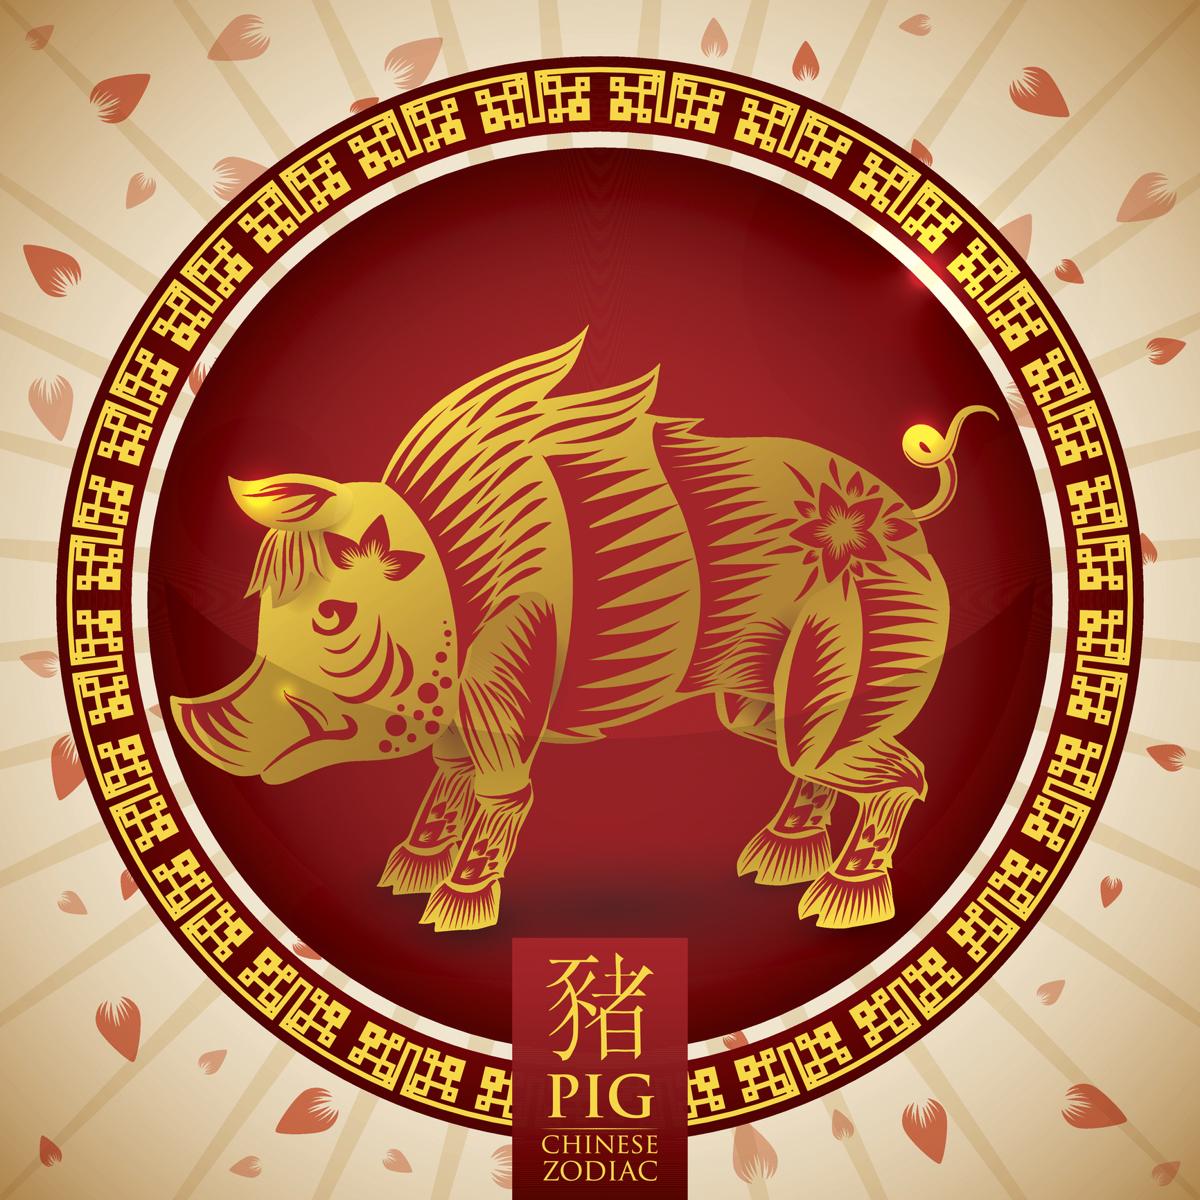 Year Of The Pig 2020 1959 2007 1971 1995 1983 Chinese